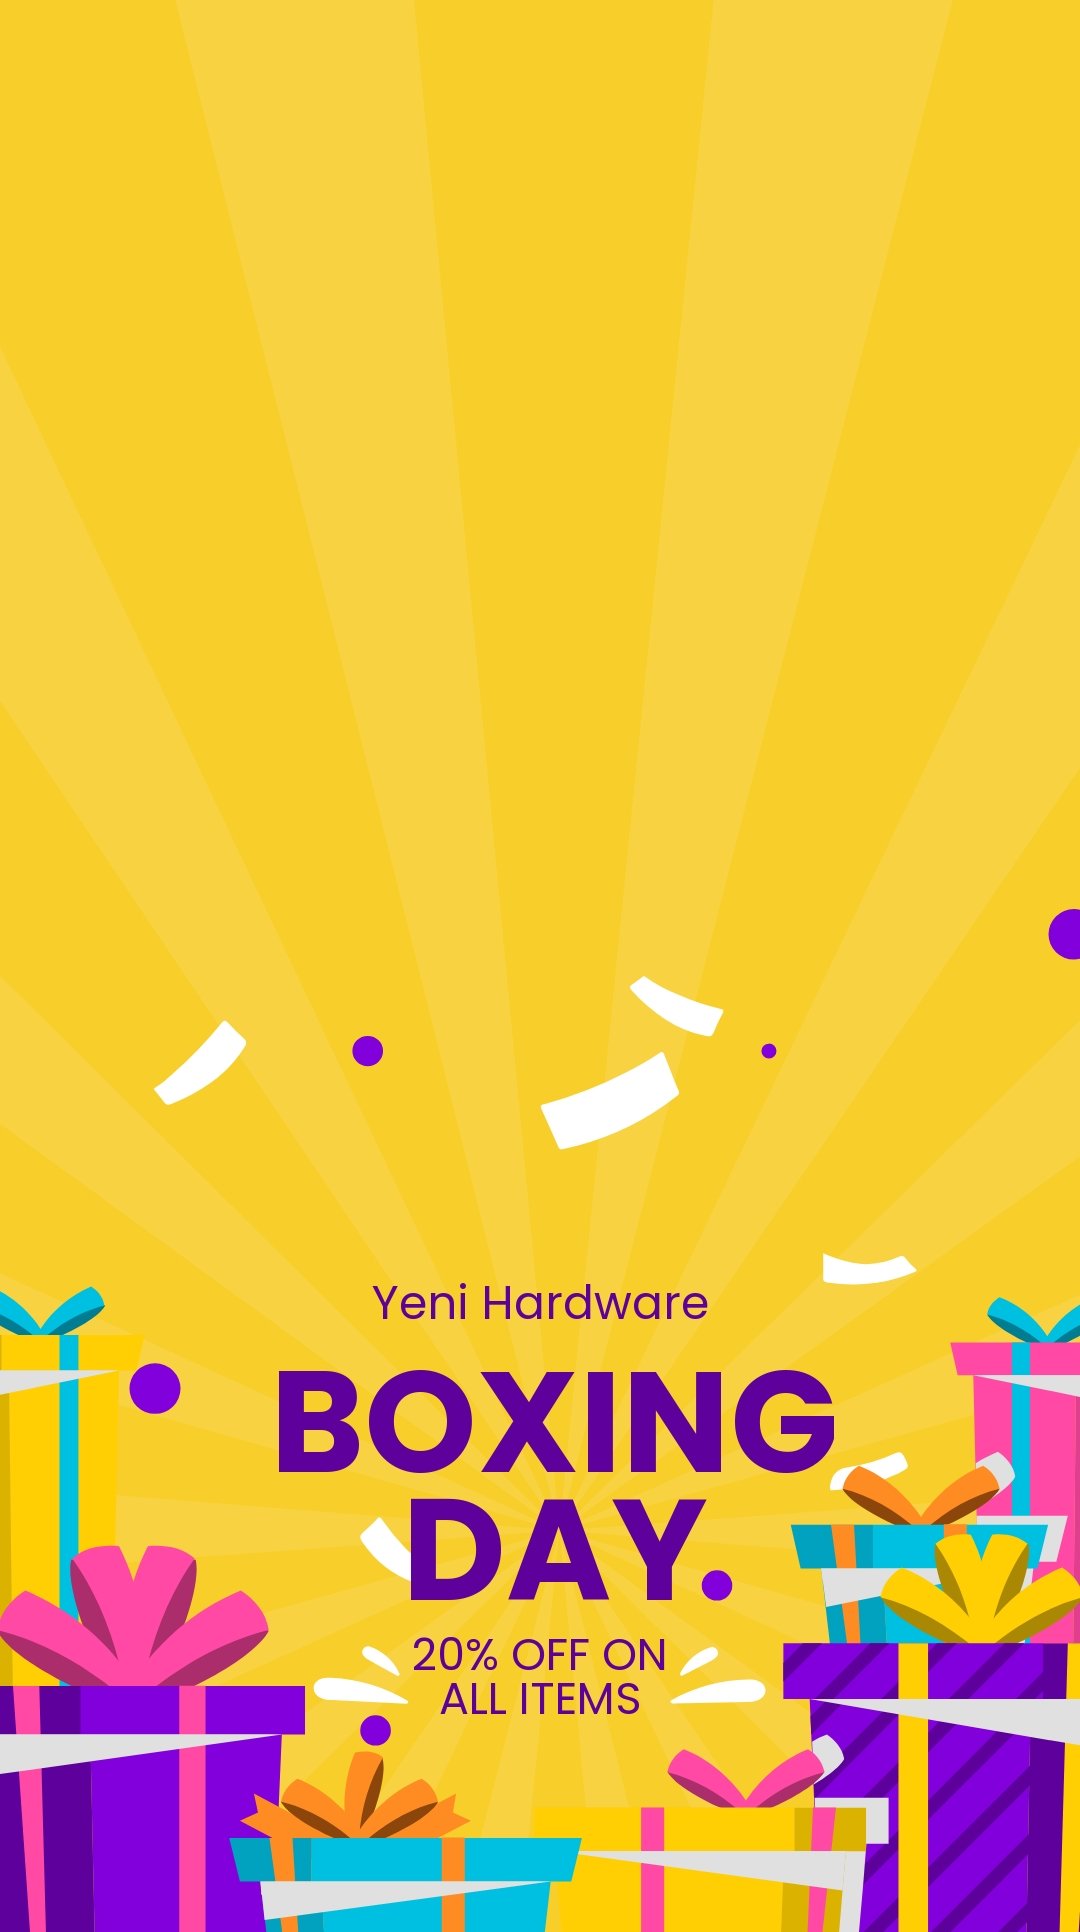 Boxing Day Promotion Snapchat Geofilter